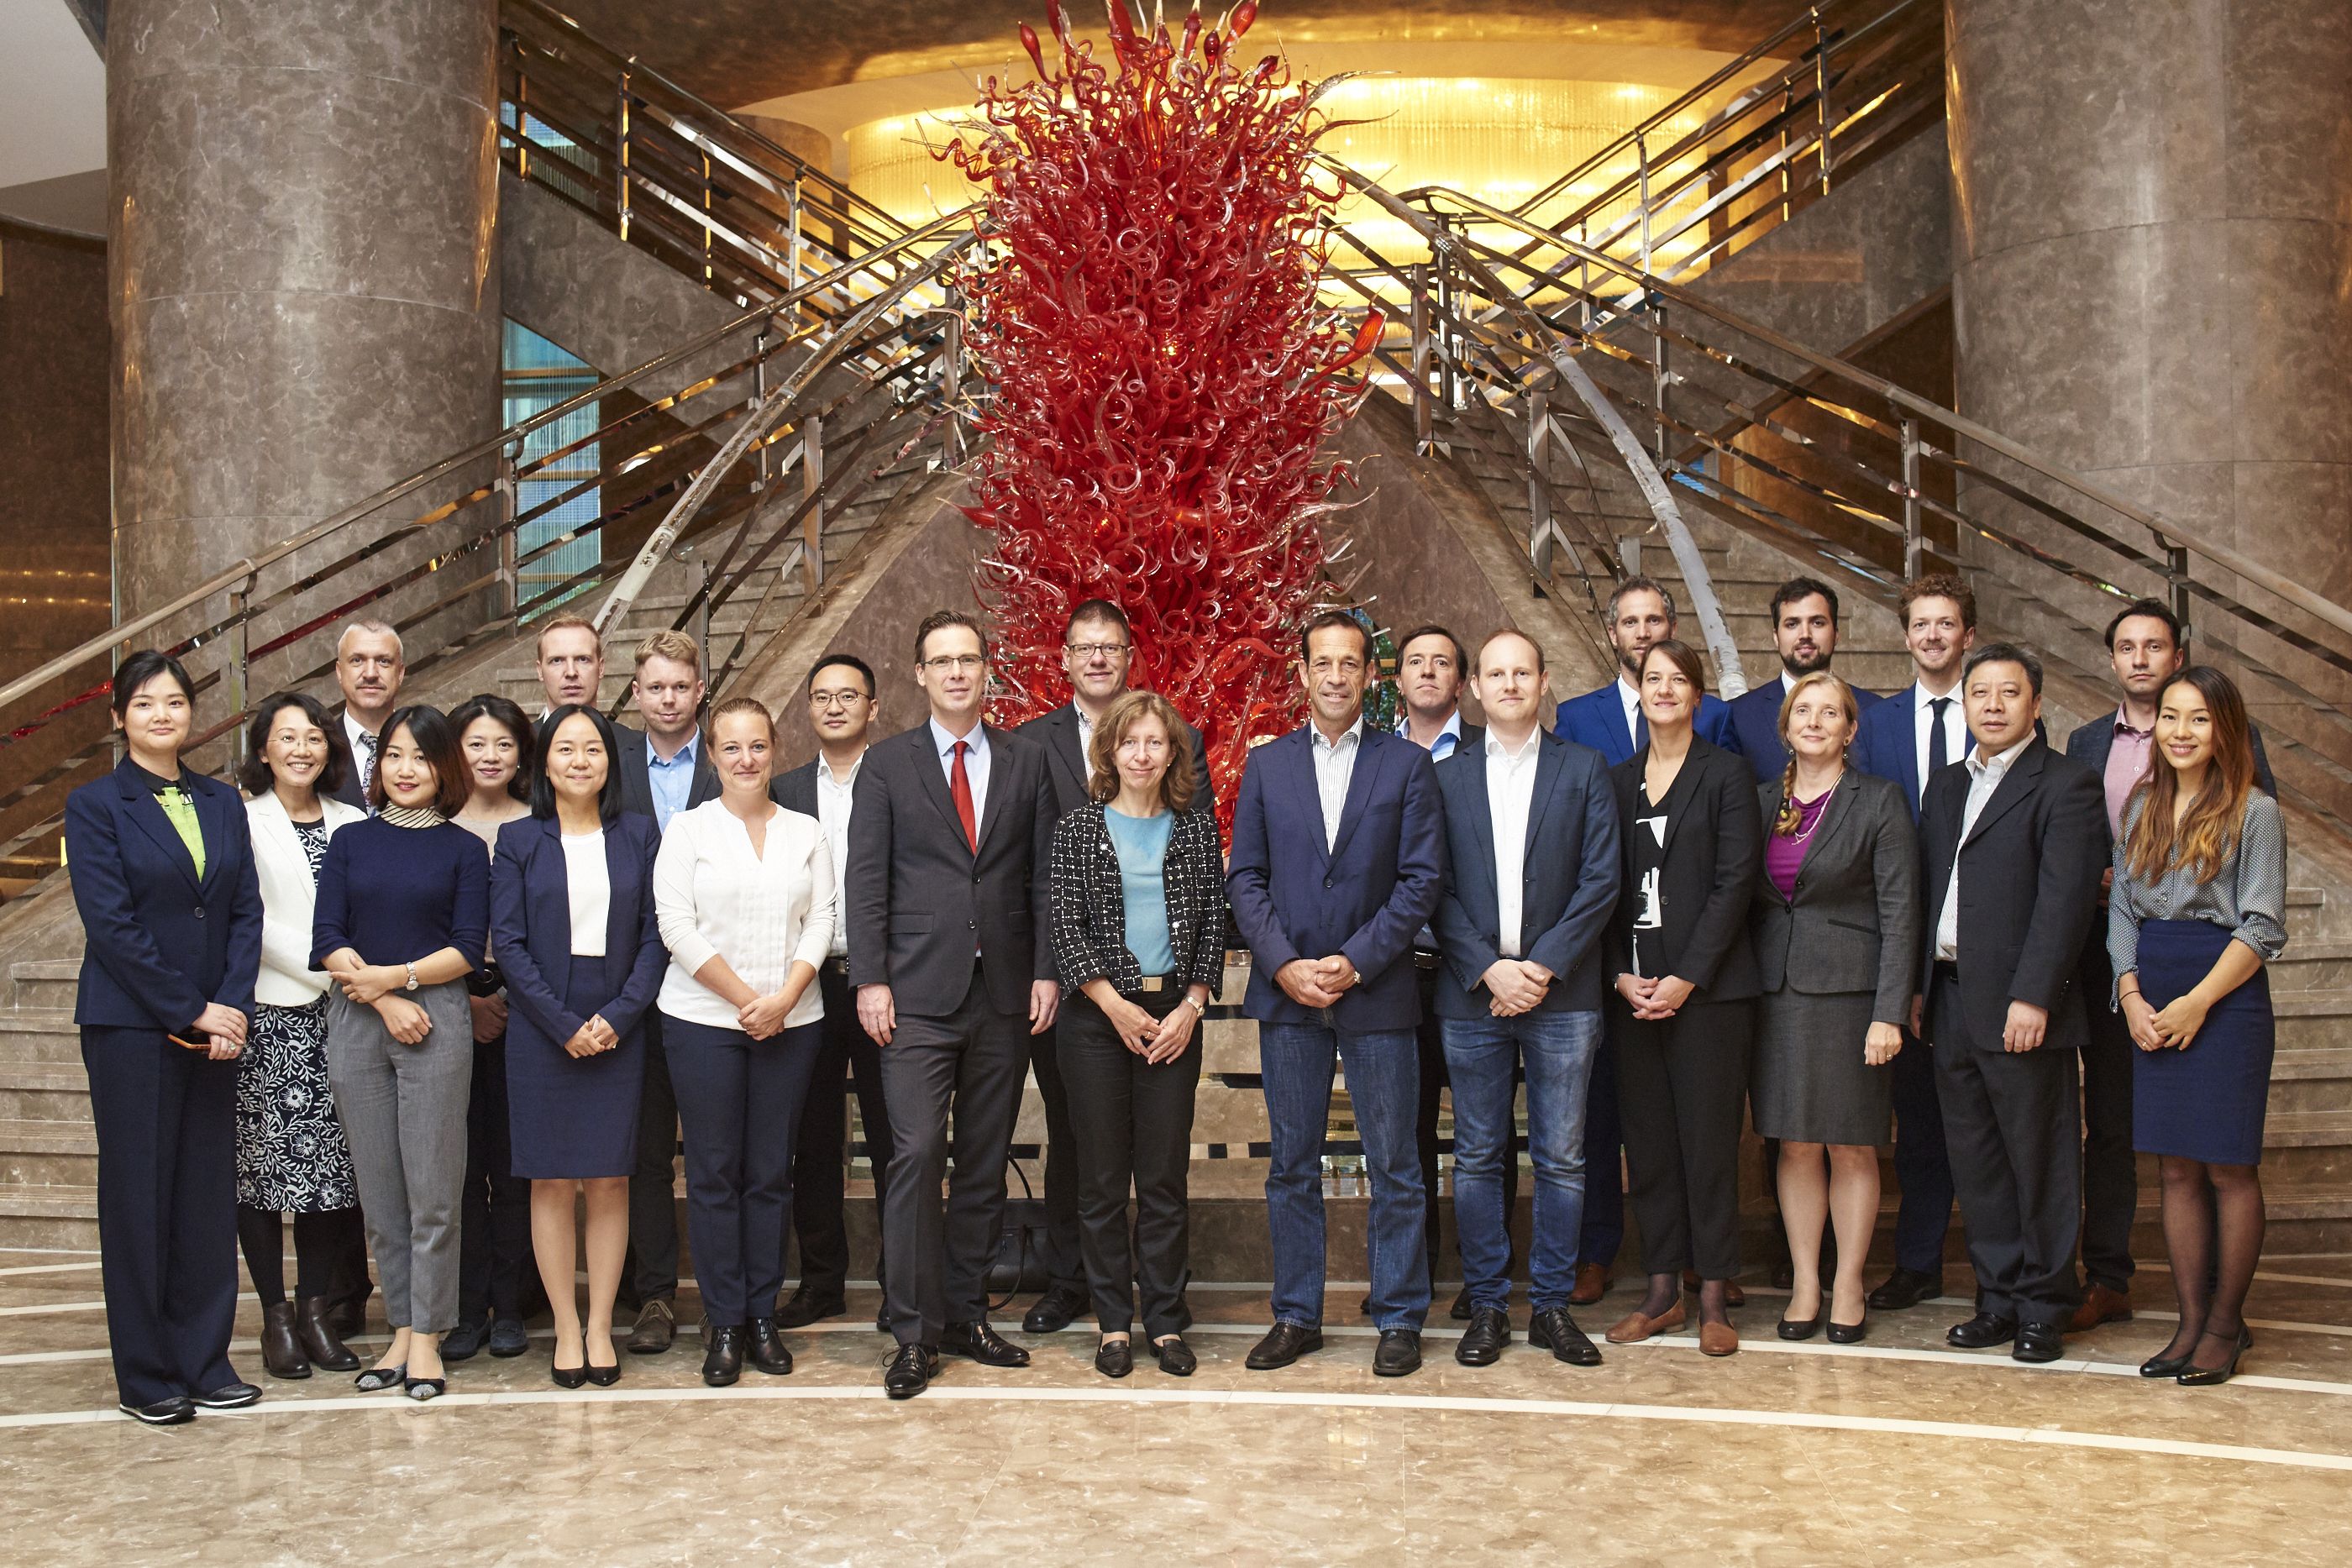 Group Photo of the Participants at the 2nd Meeting of the German Local Business Advisory Council